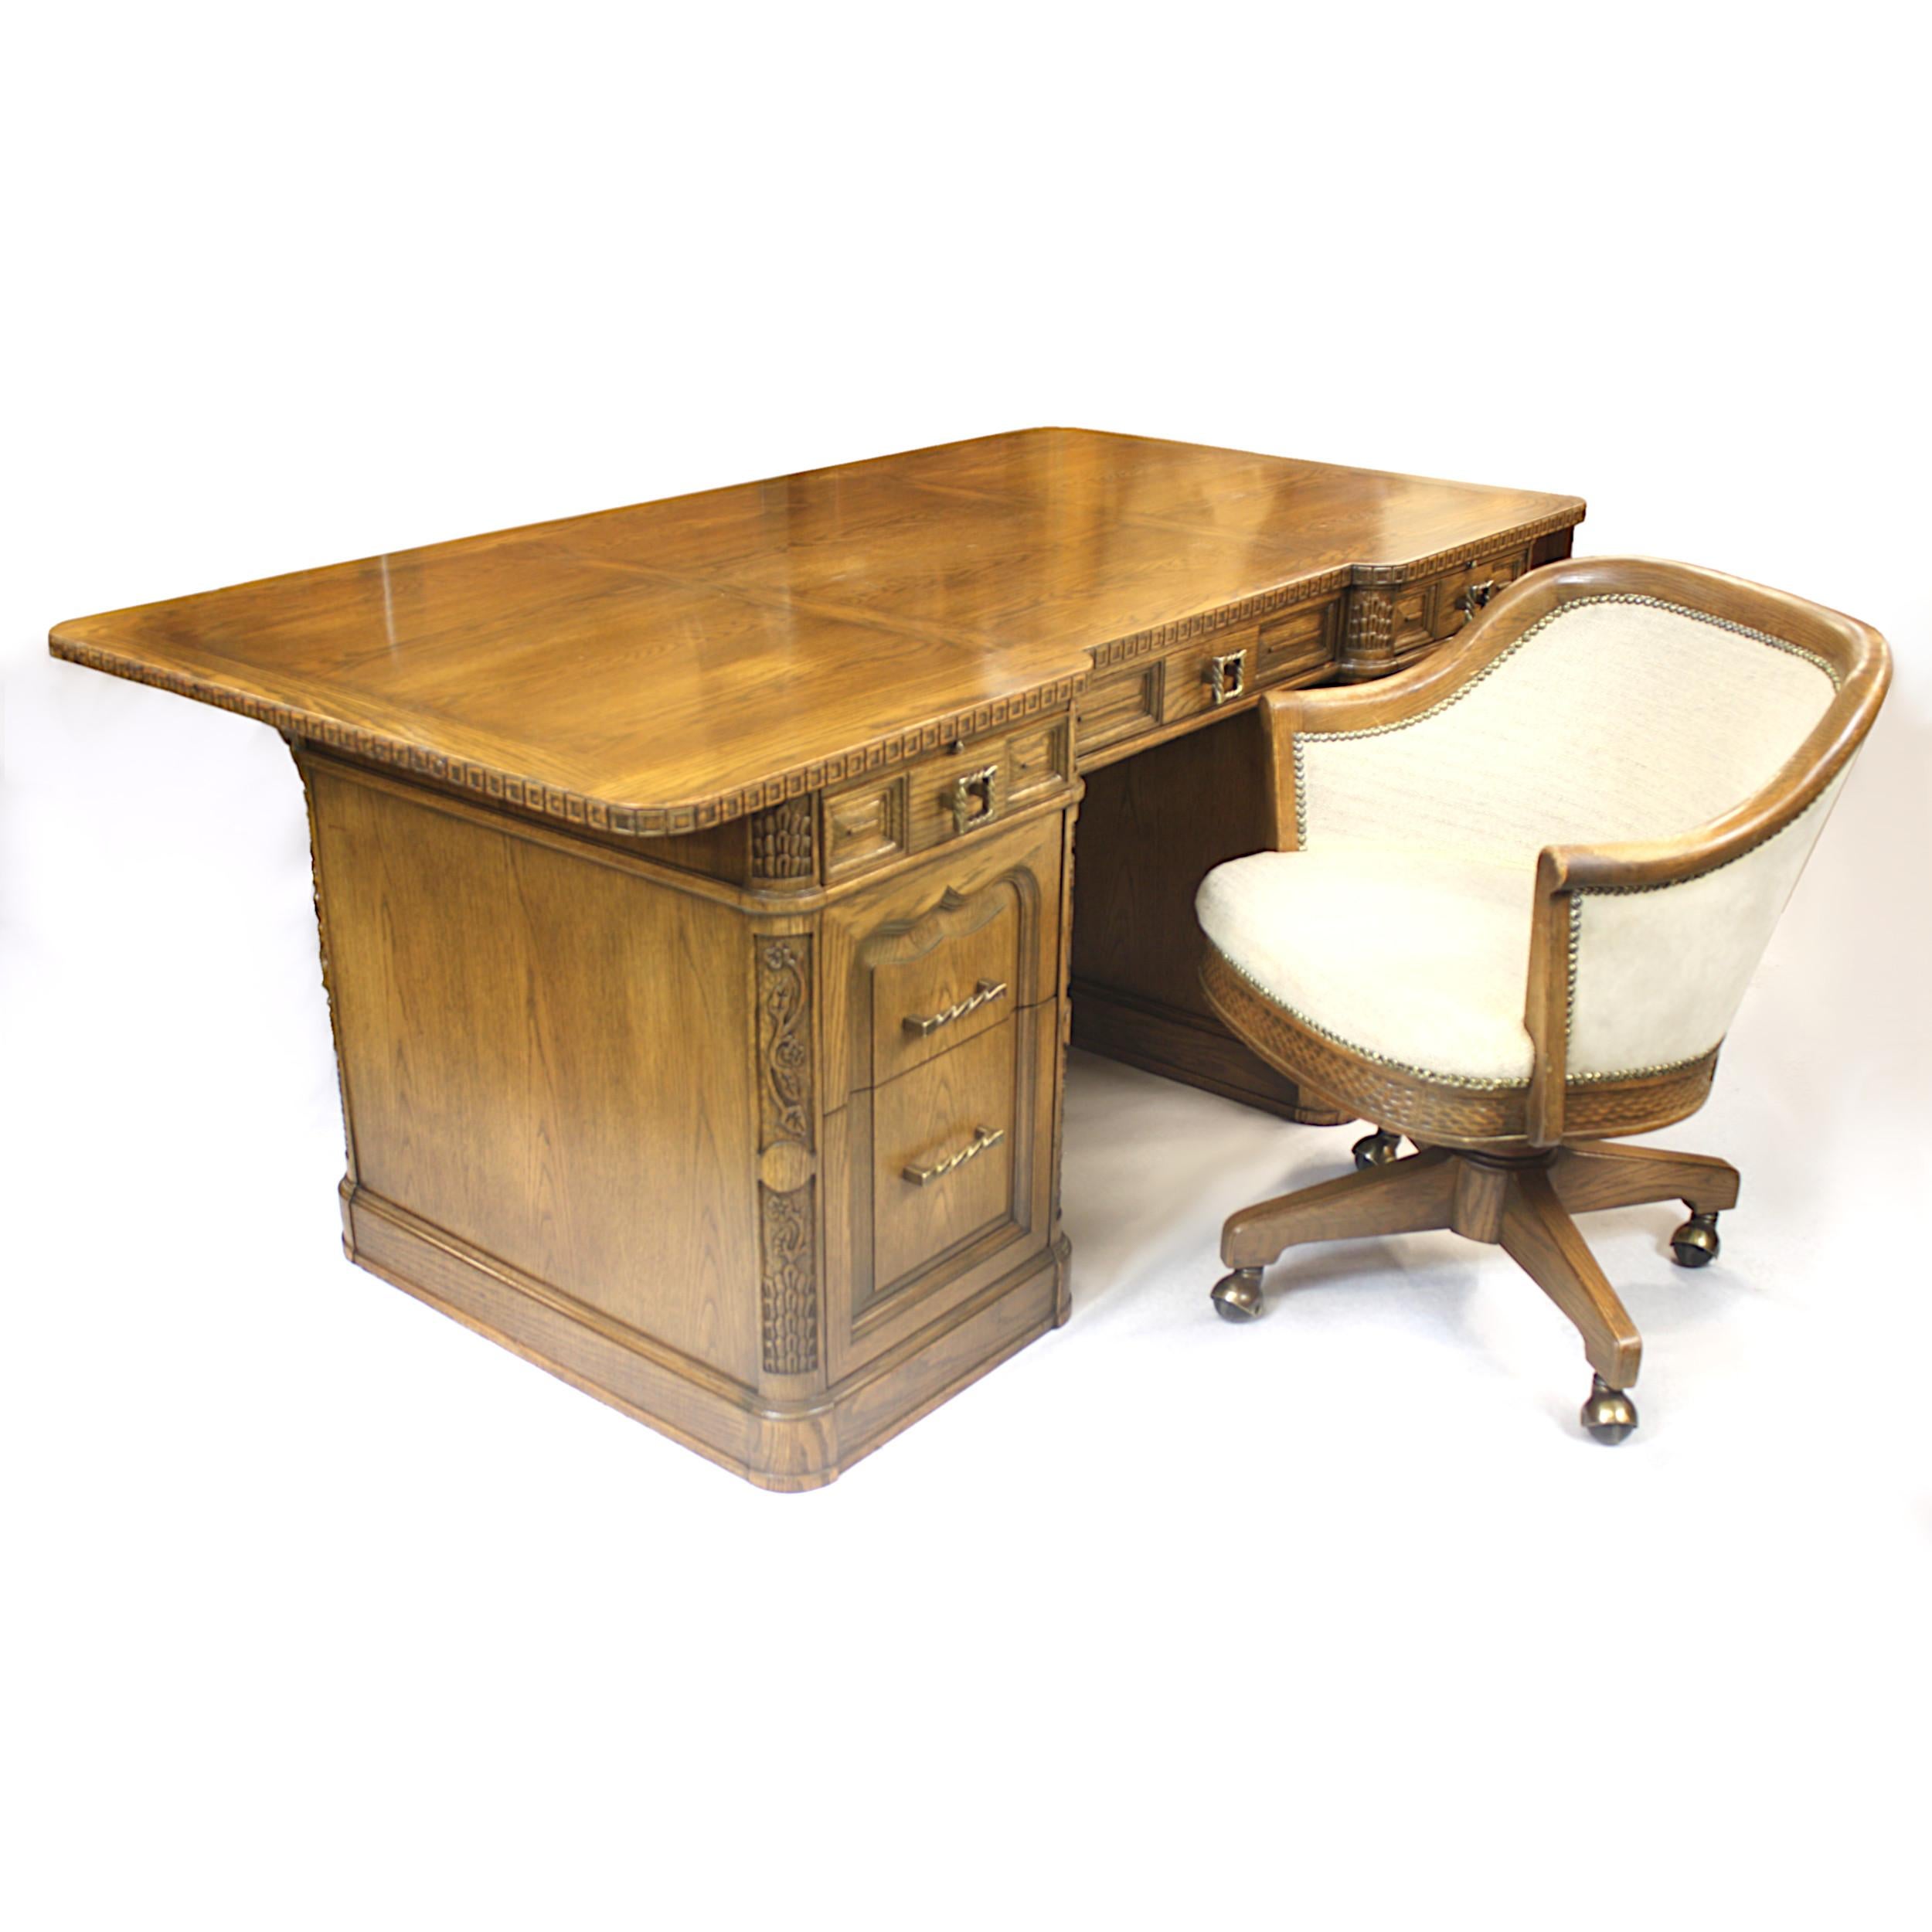 Excellent vintage executive desk and chair in the Classic Viking Oak style by the Romweber Furniture Co. of Batesville, IN. This grandiose desk features wonderful relief carved details, solid oak construction, and solid brass hardware. This is a